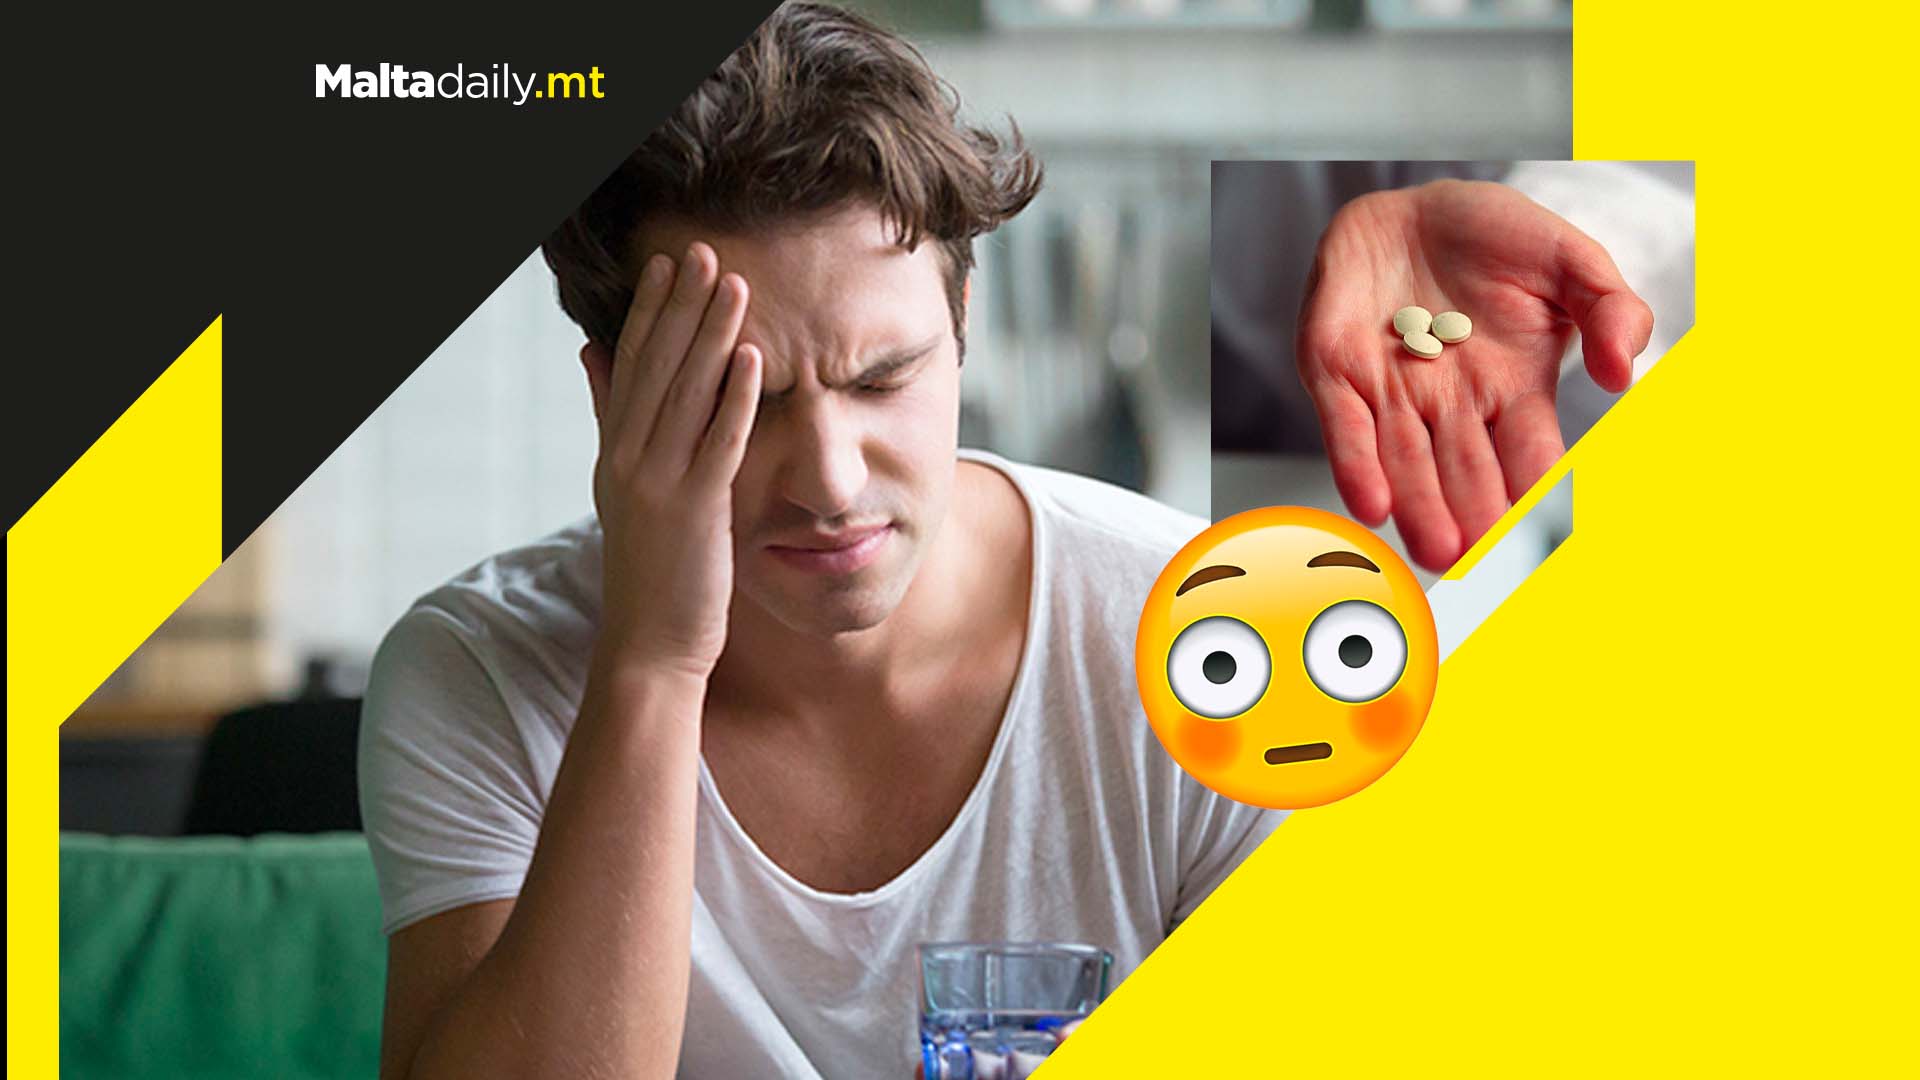 UK starts selling new hangover pill to break down alcohol faster